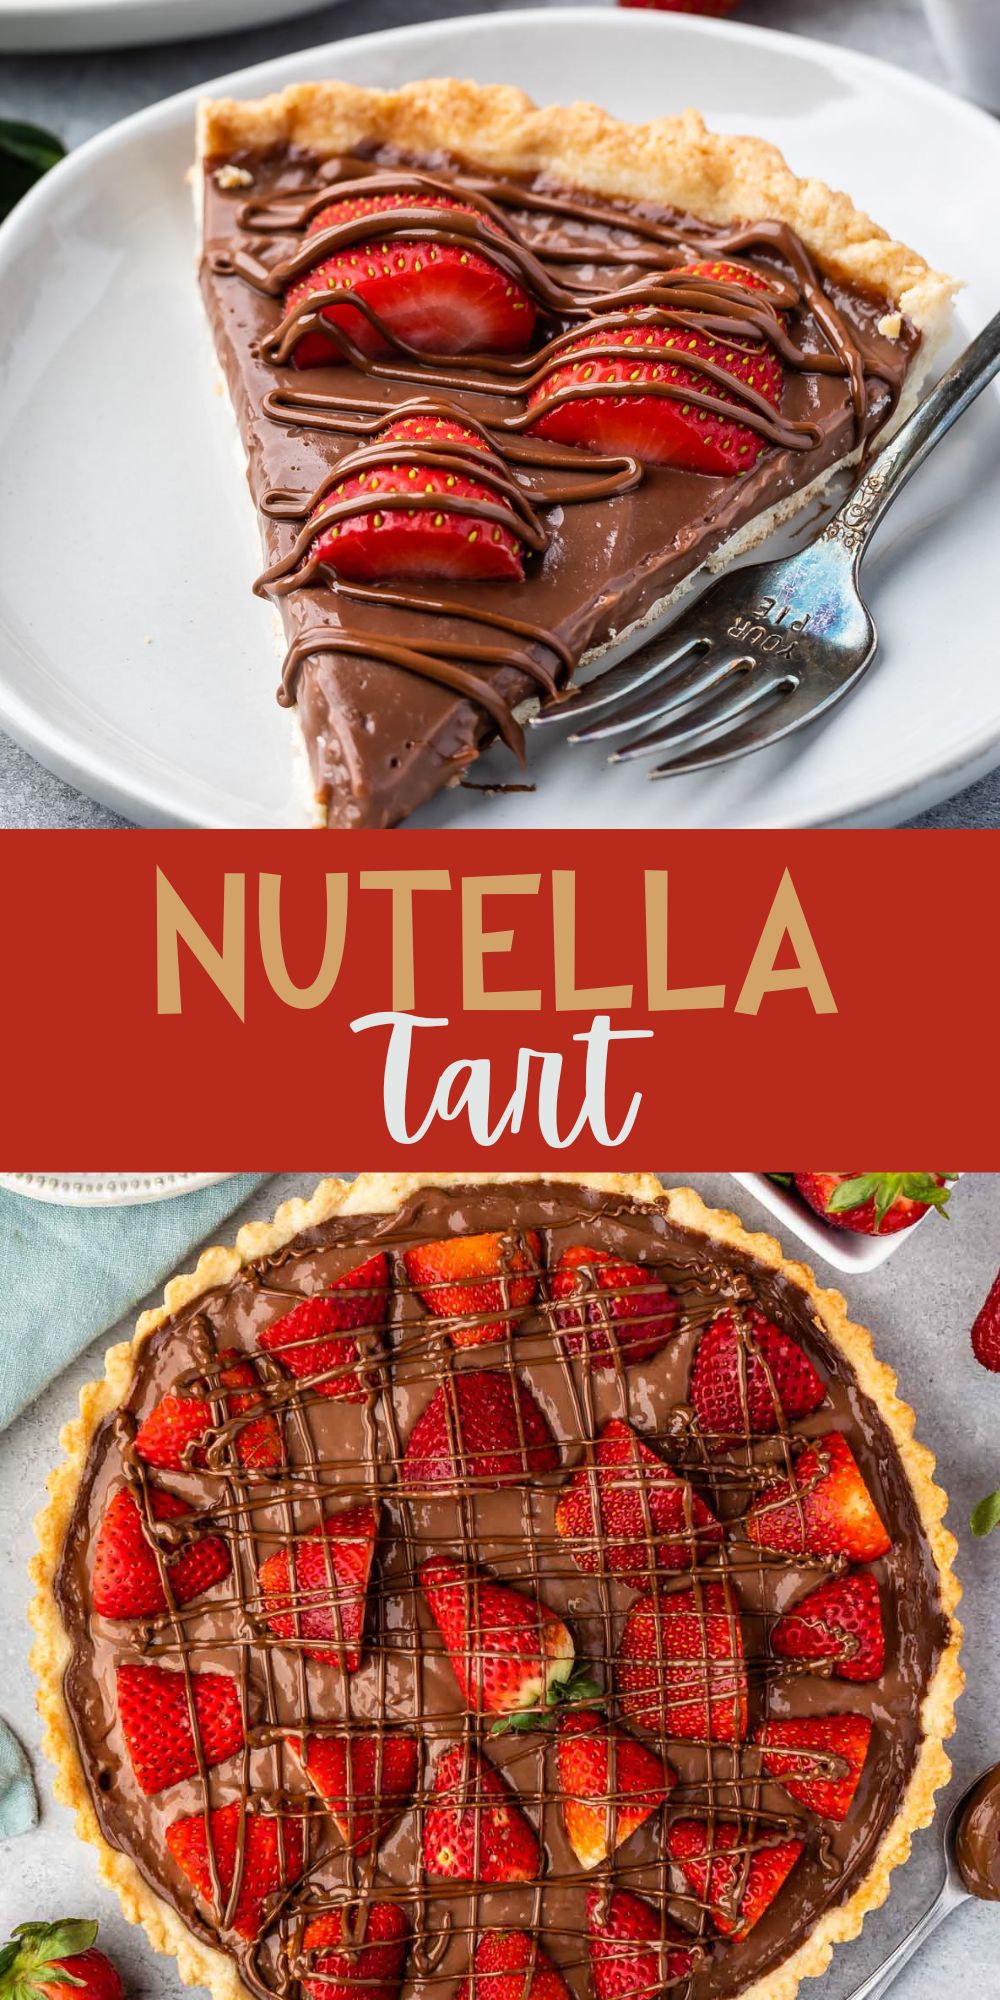 two photos of tart in crust covered with chocolate and strawberries with words on the image.